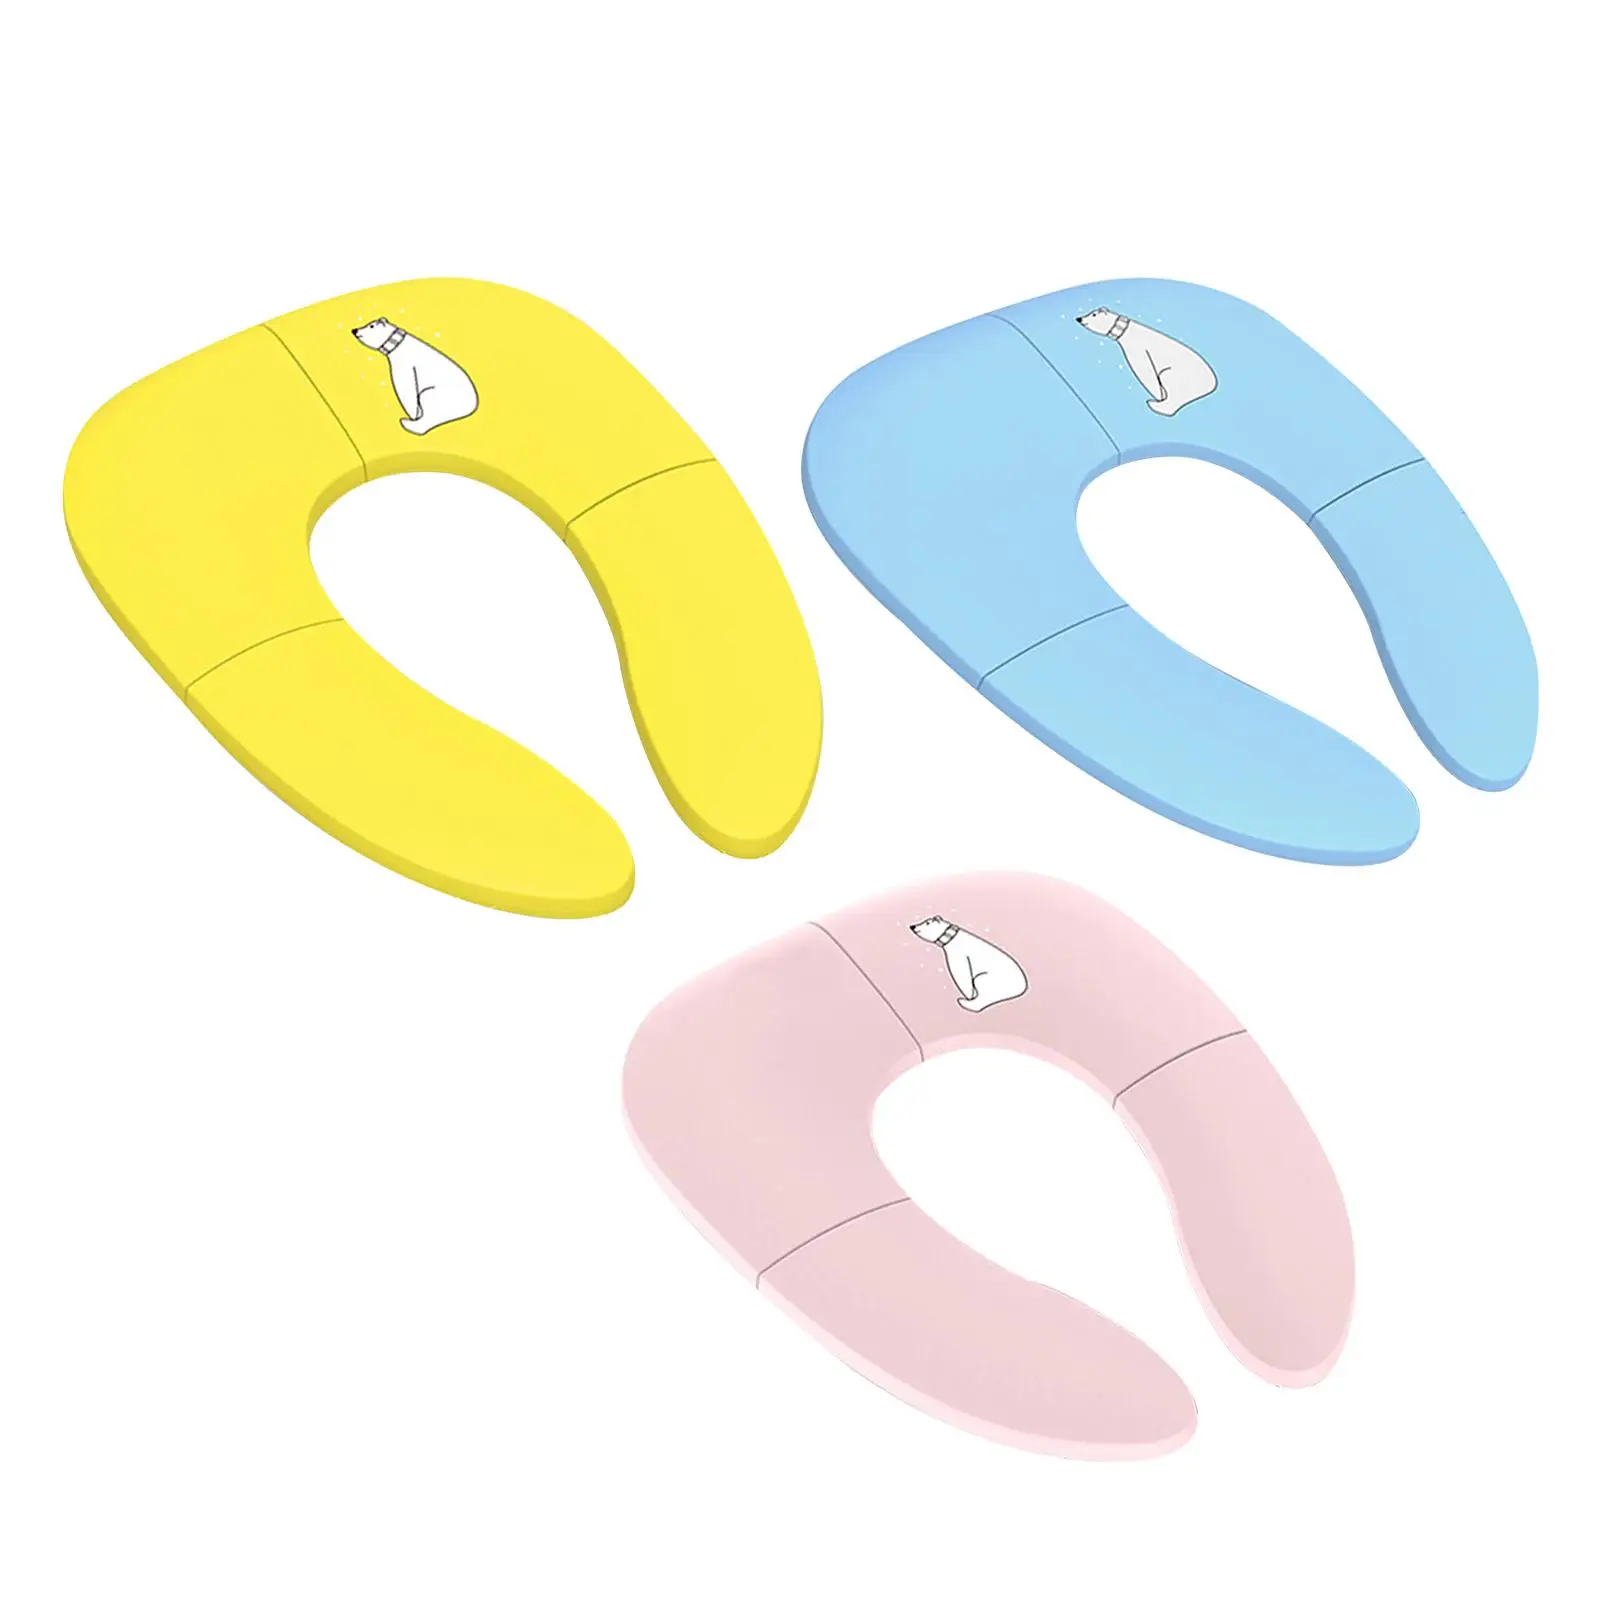 Foldable Toilet Cover training Seat Reusable Non Slip Portable Toilet Seat pad for Home Use Adults girls Kids